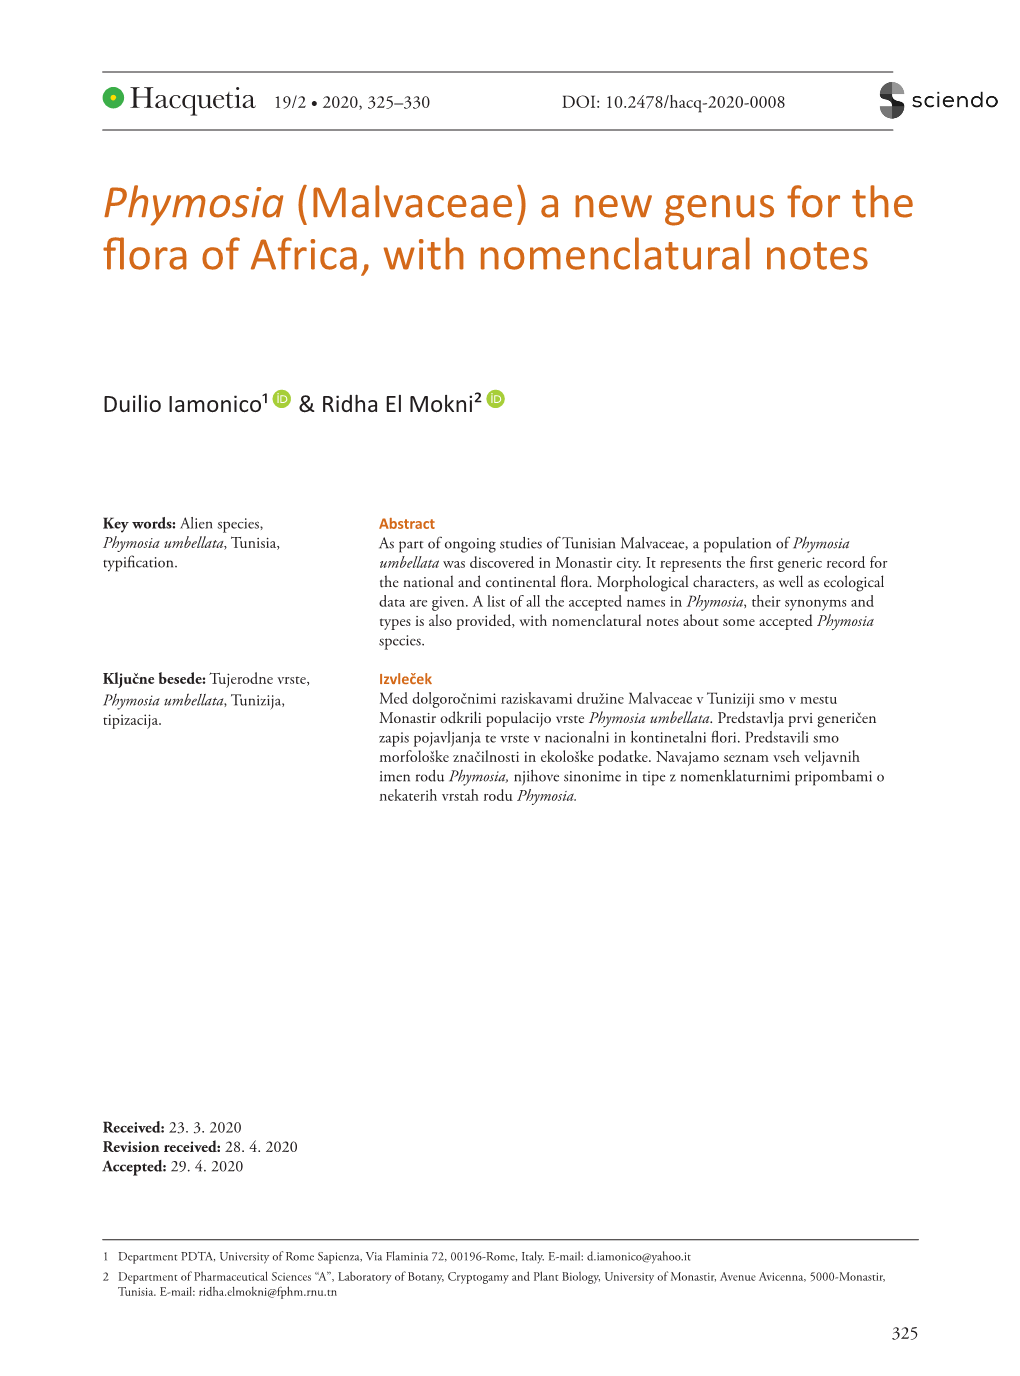 Phymosia (Malvaceae) a New Genus for the Flora of Africa, with Nomenclatural Notes